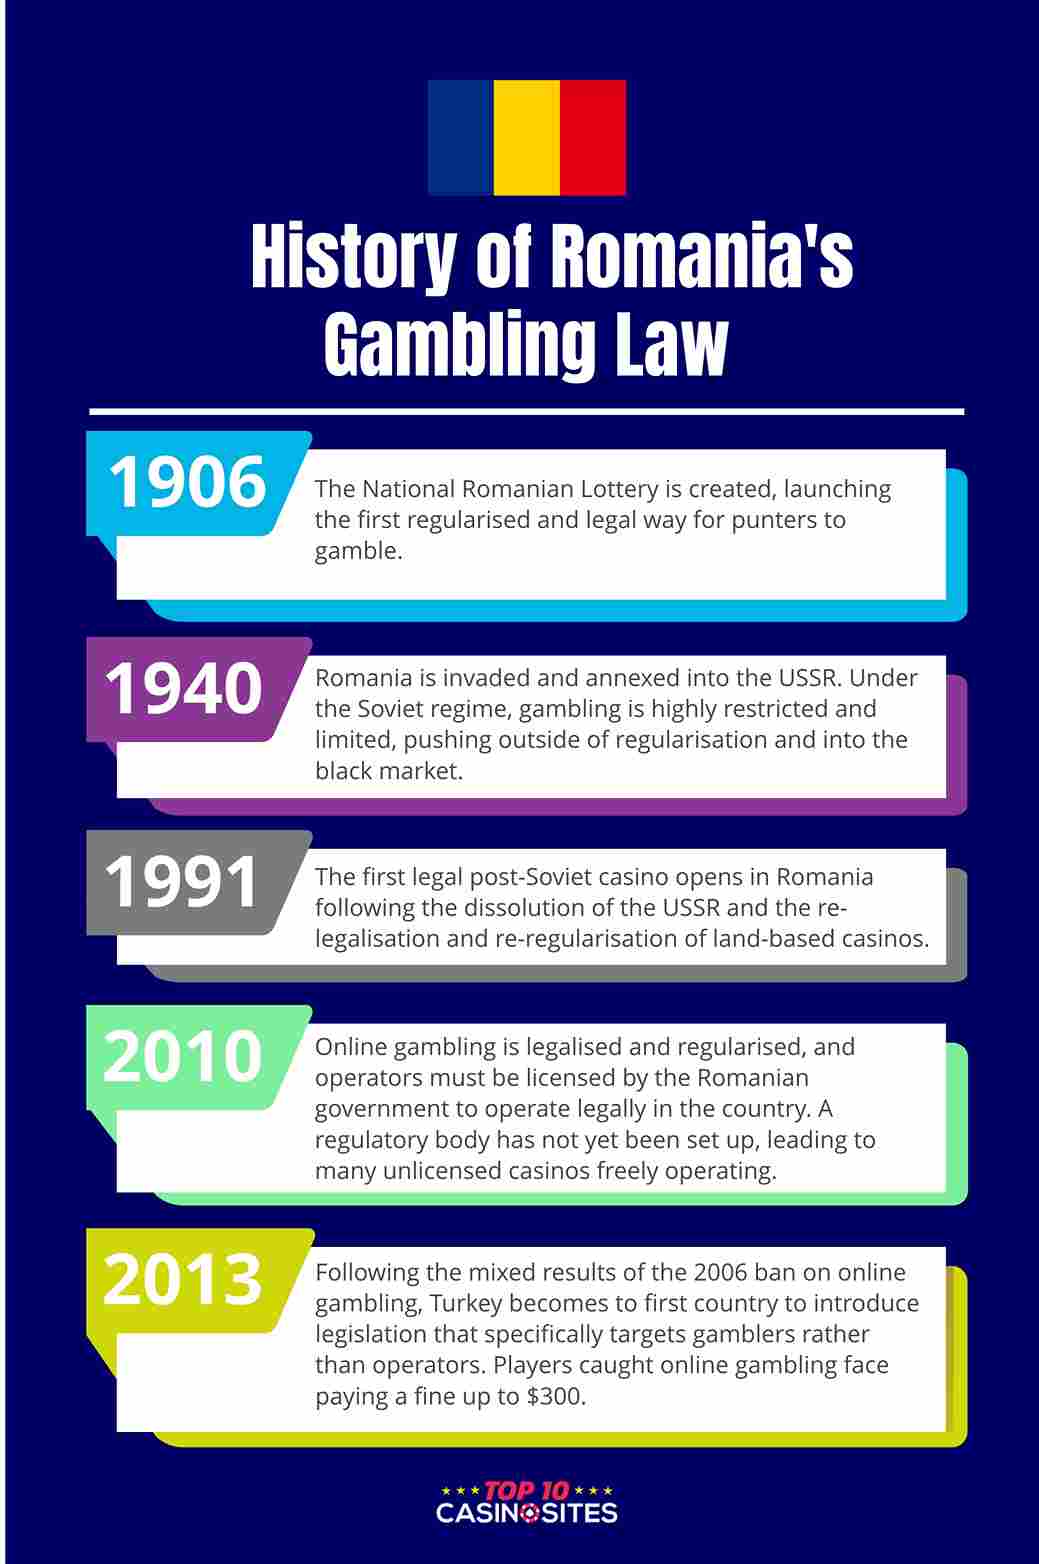 An infographic that outlines the history of gambling laws in Romania.